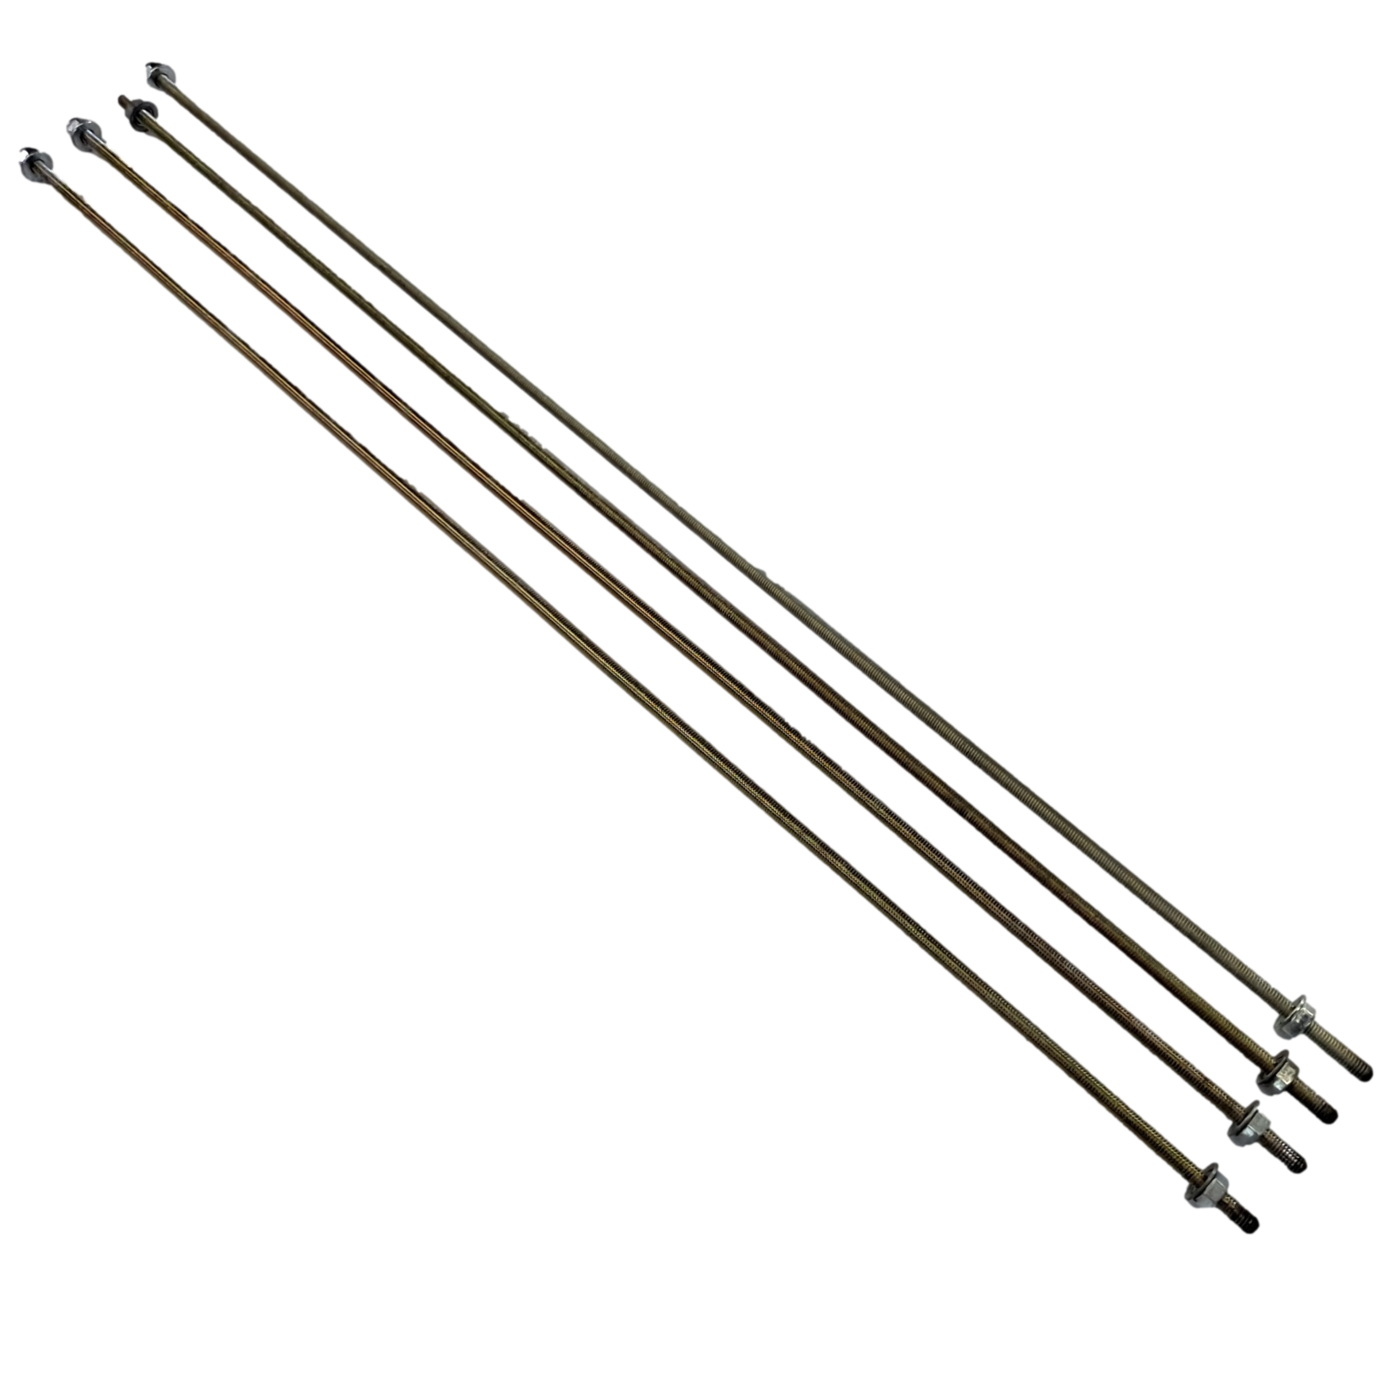 4x 21.5" threaded rods with bolts for SPIM08HP 16ah